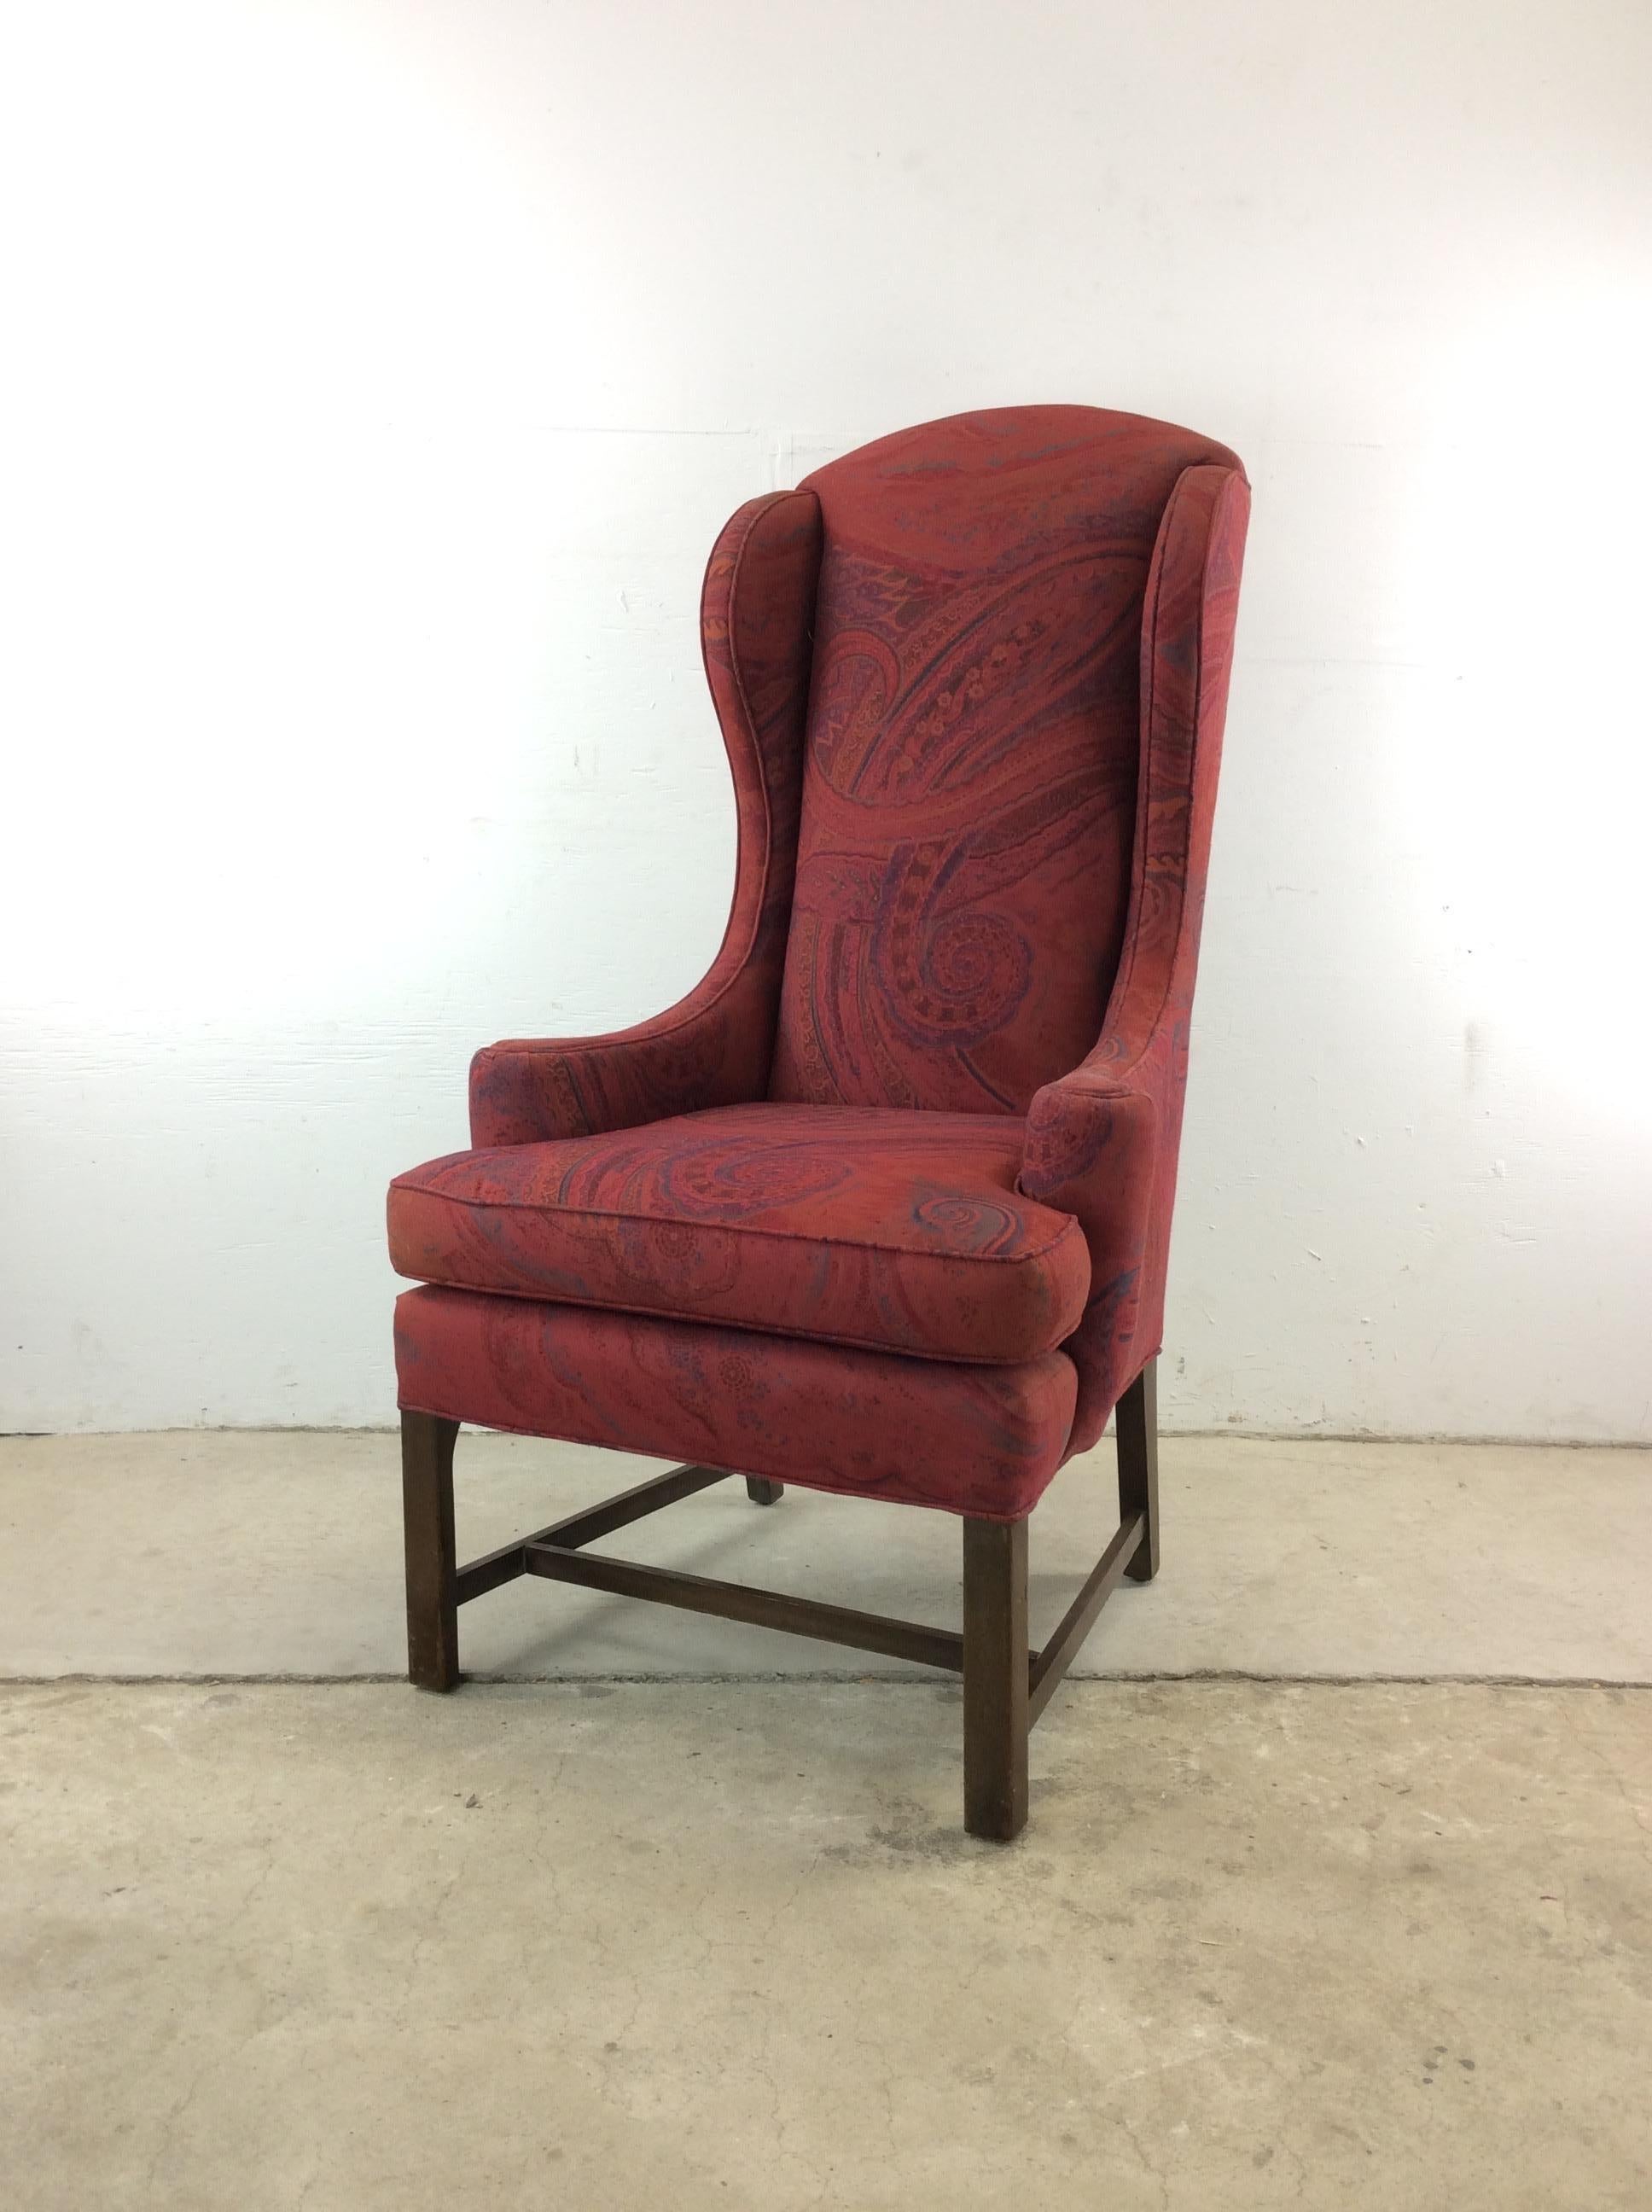 American Craftsman Vintage Red Upholstered Wingback Chair with Wood Base For Sale